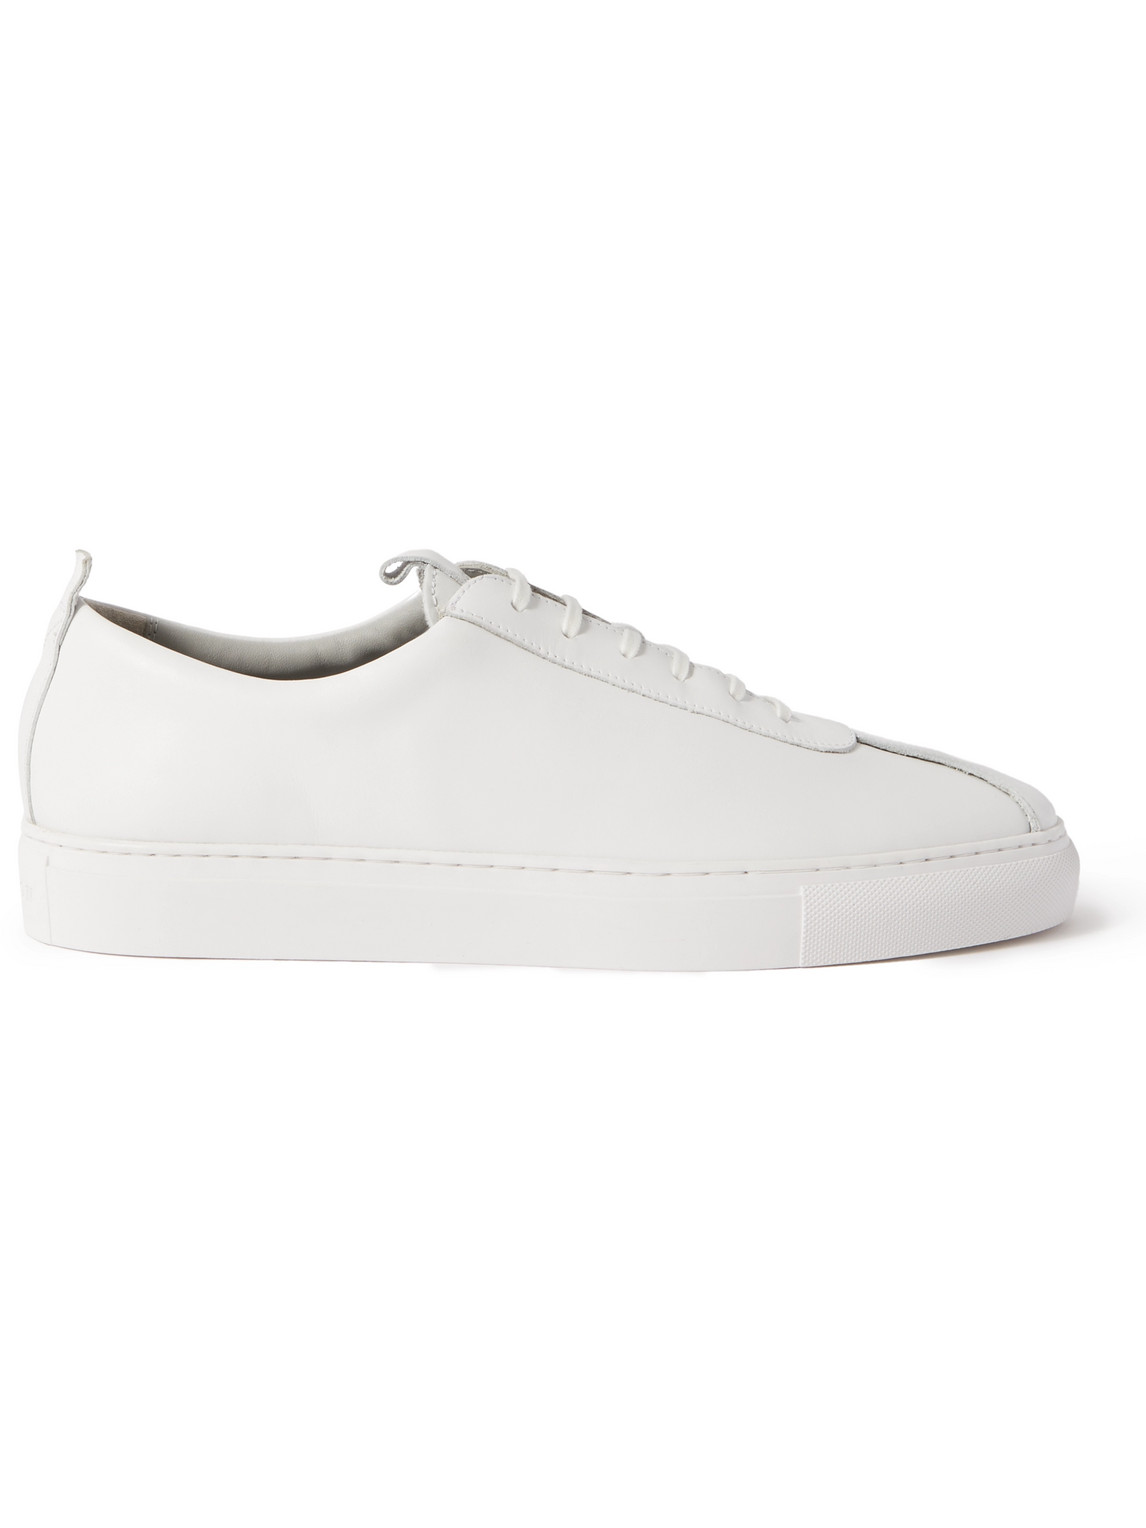 Grenson Leather Sneakers In White